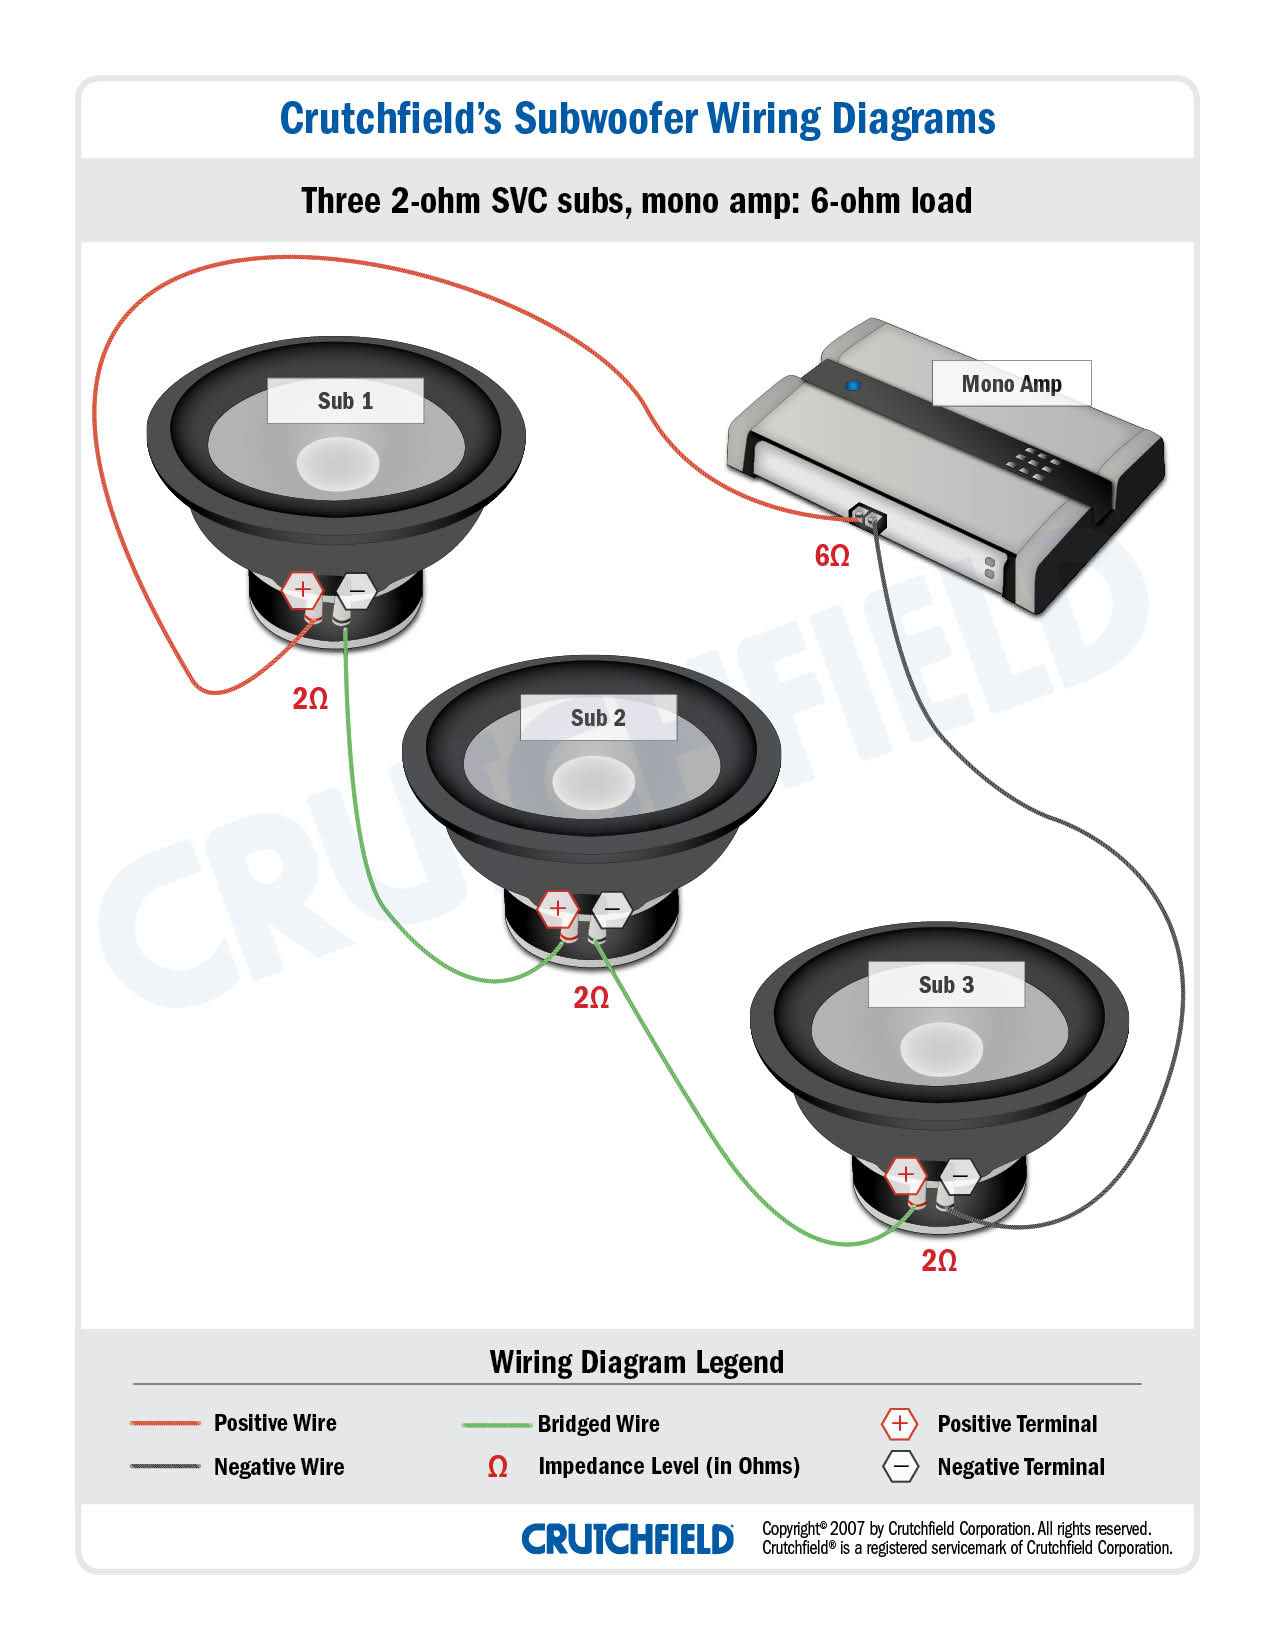 Subwoofer Wiring Diagrams — How To Wire Your Subs - Crutchfield Wiring Diagram